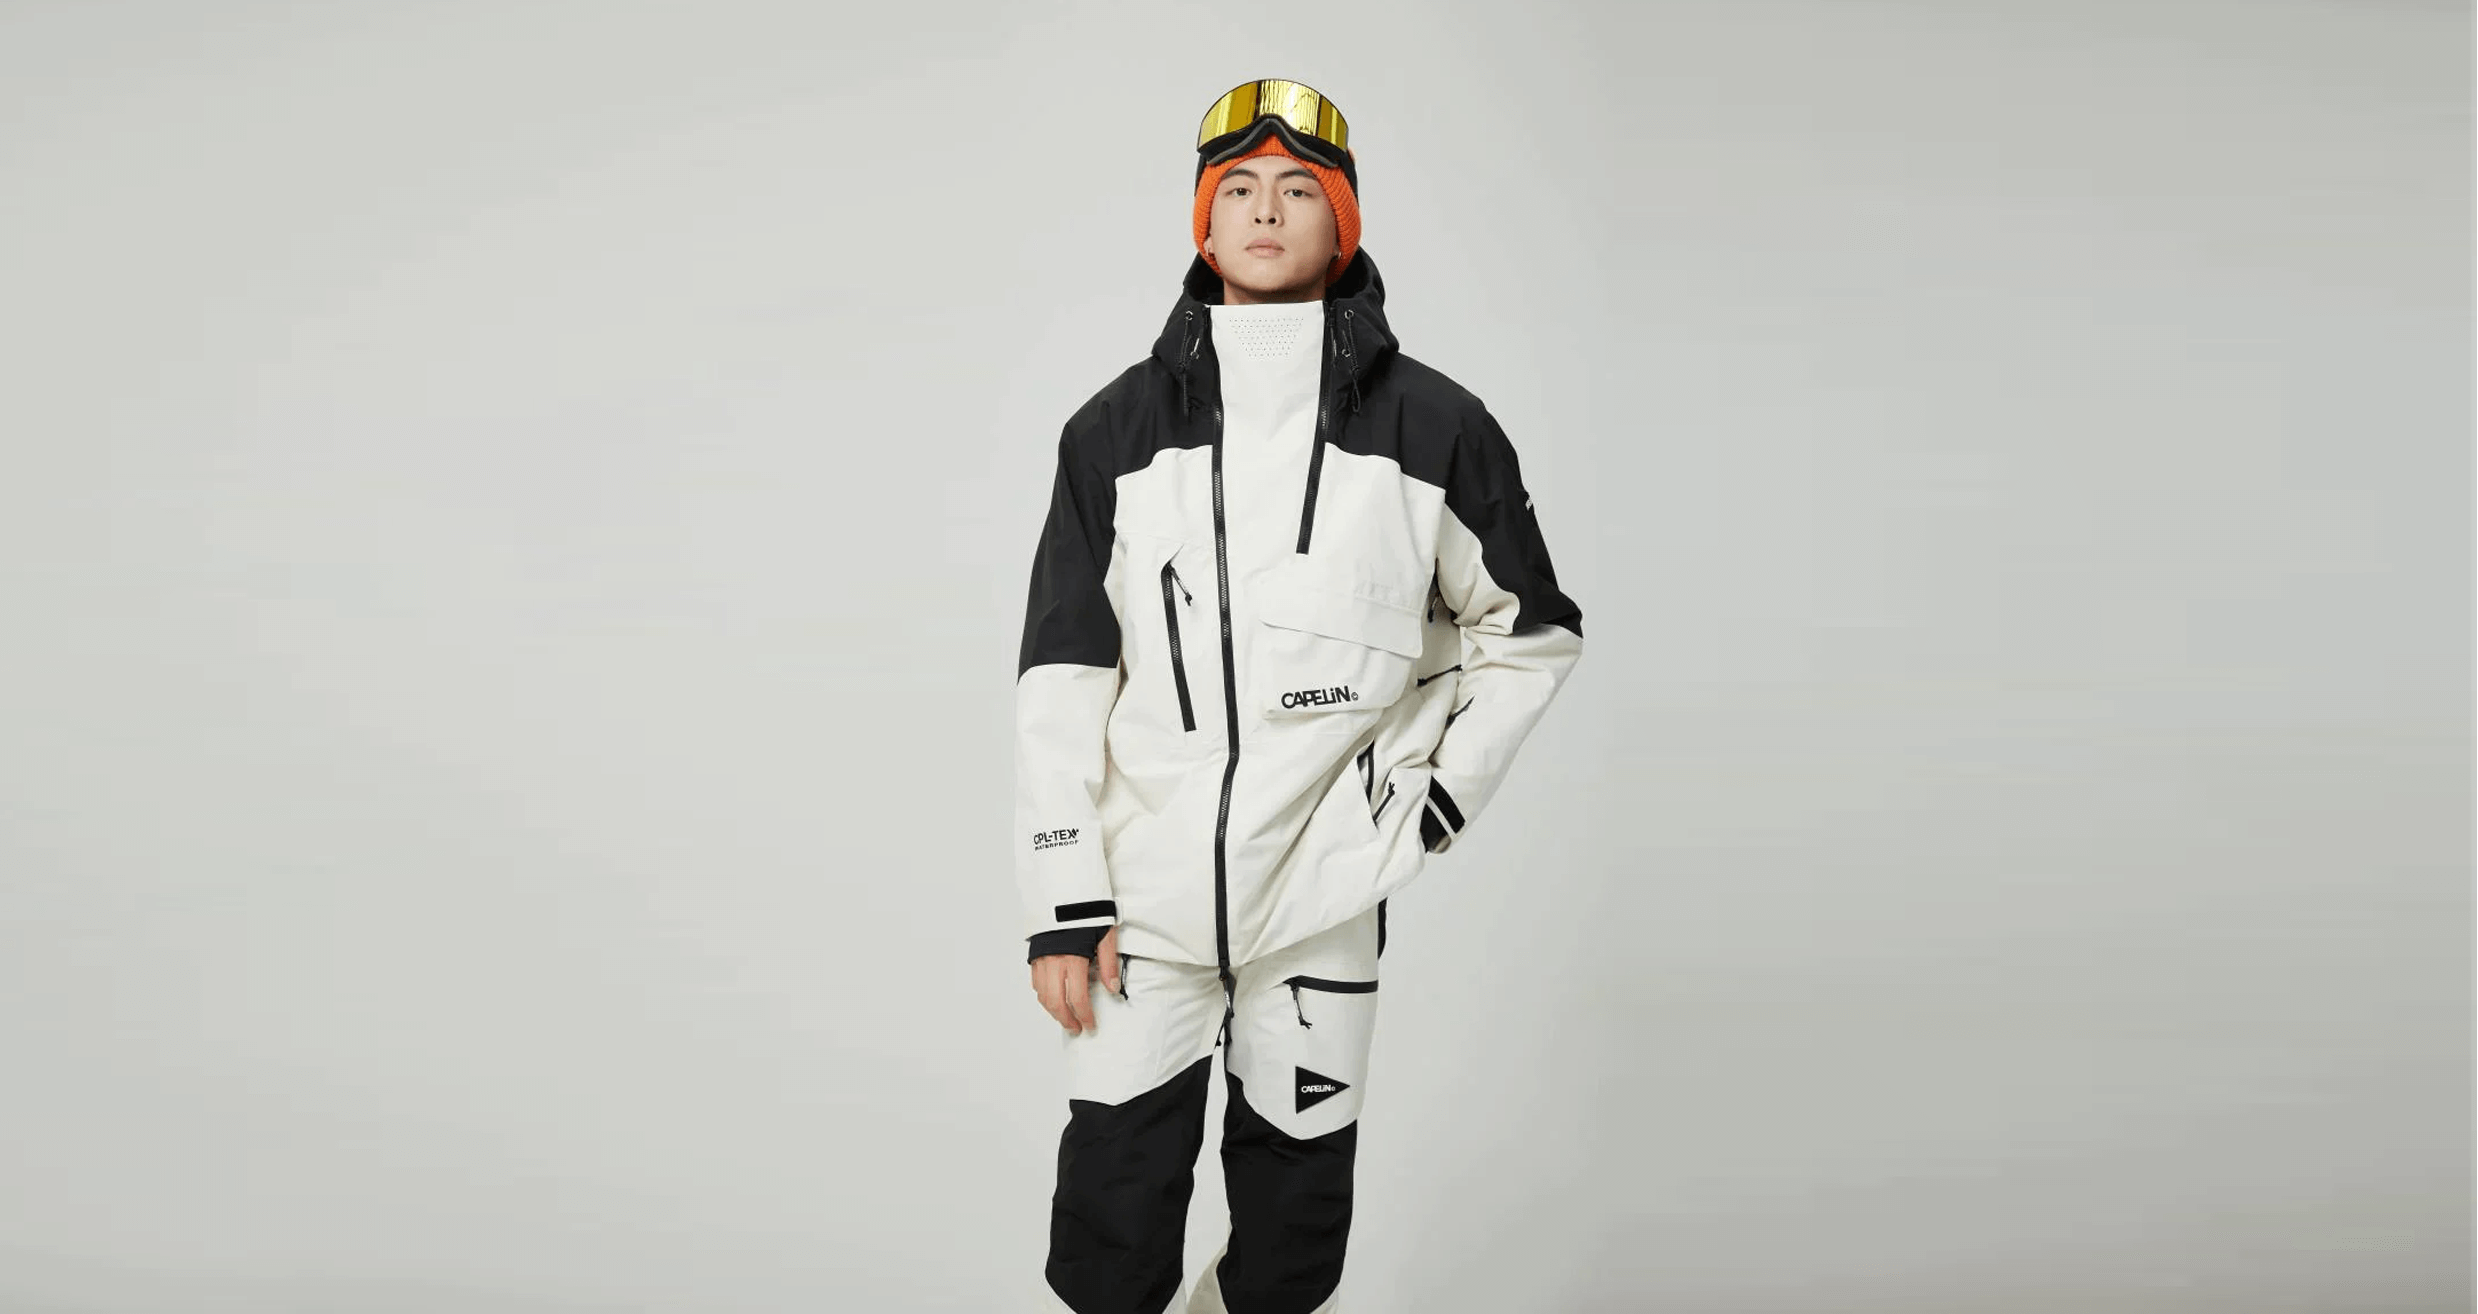 CAPELIN CREW | Stylish Cute Snowboarding Outfits for Your Winter Adventure